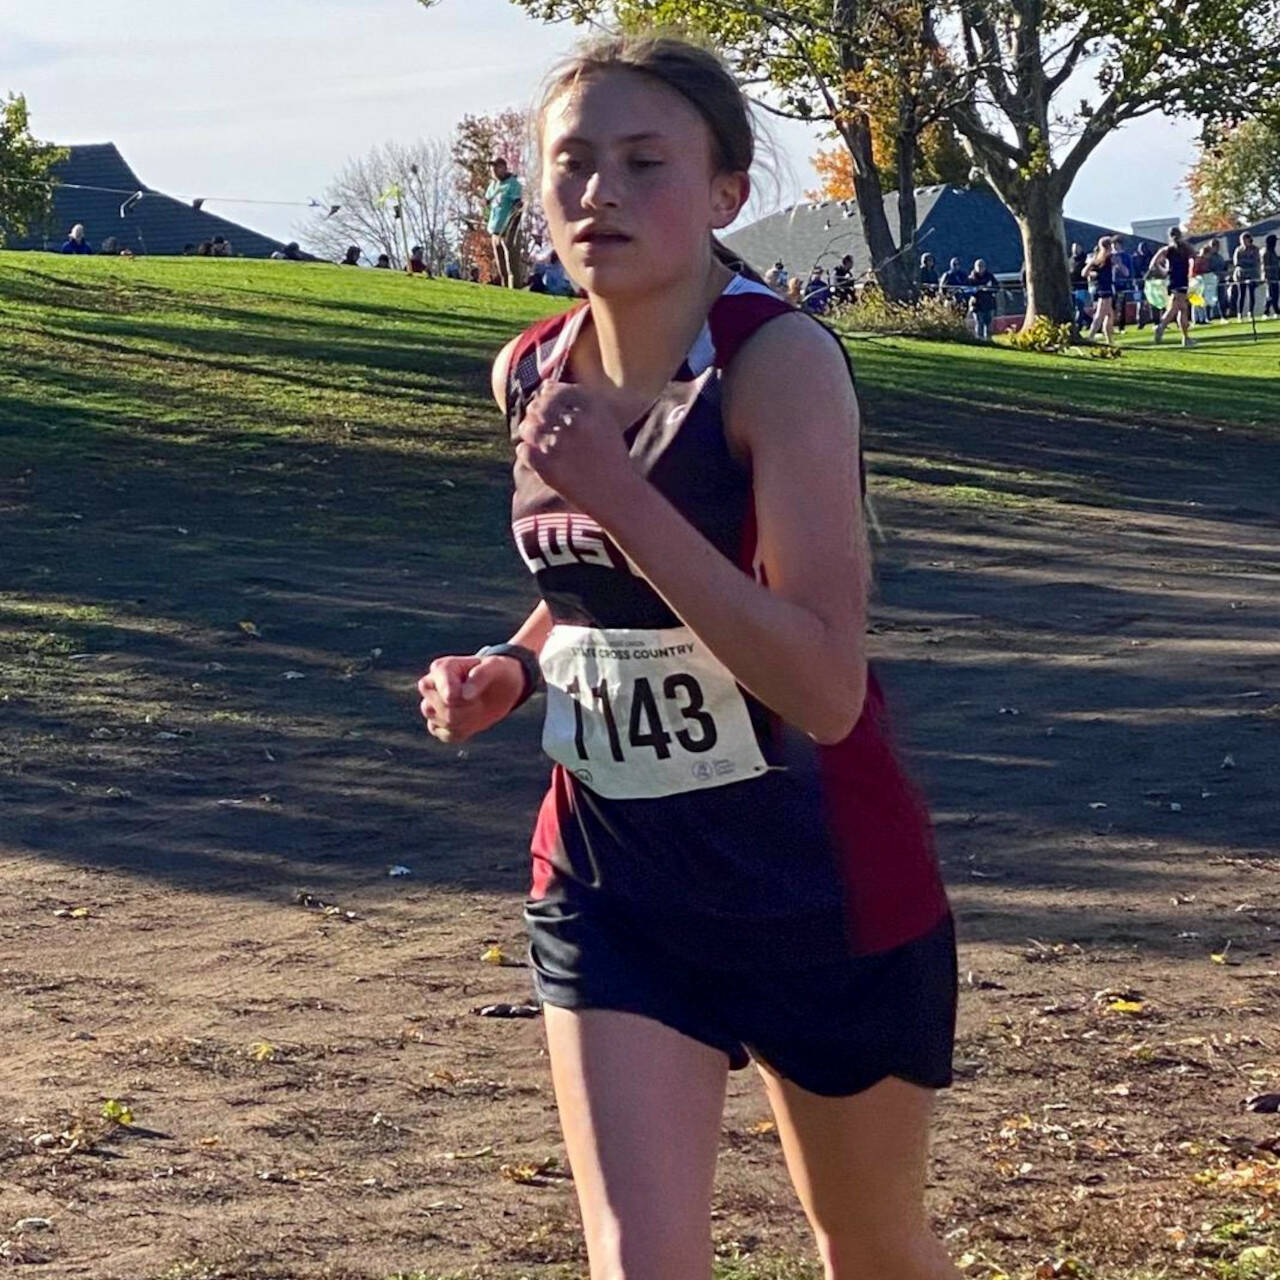 SUBMITTED PHOTO 
Ocosta sophomore Madeline Schaeffer competes during the 1B/2B girls race at the WIAA State Championships on Saturday at Sun Willows Golf Course in Pasco.